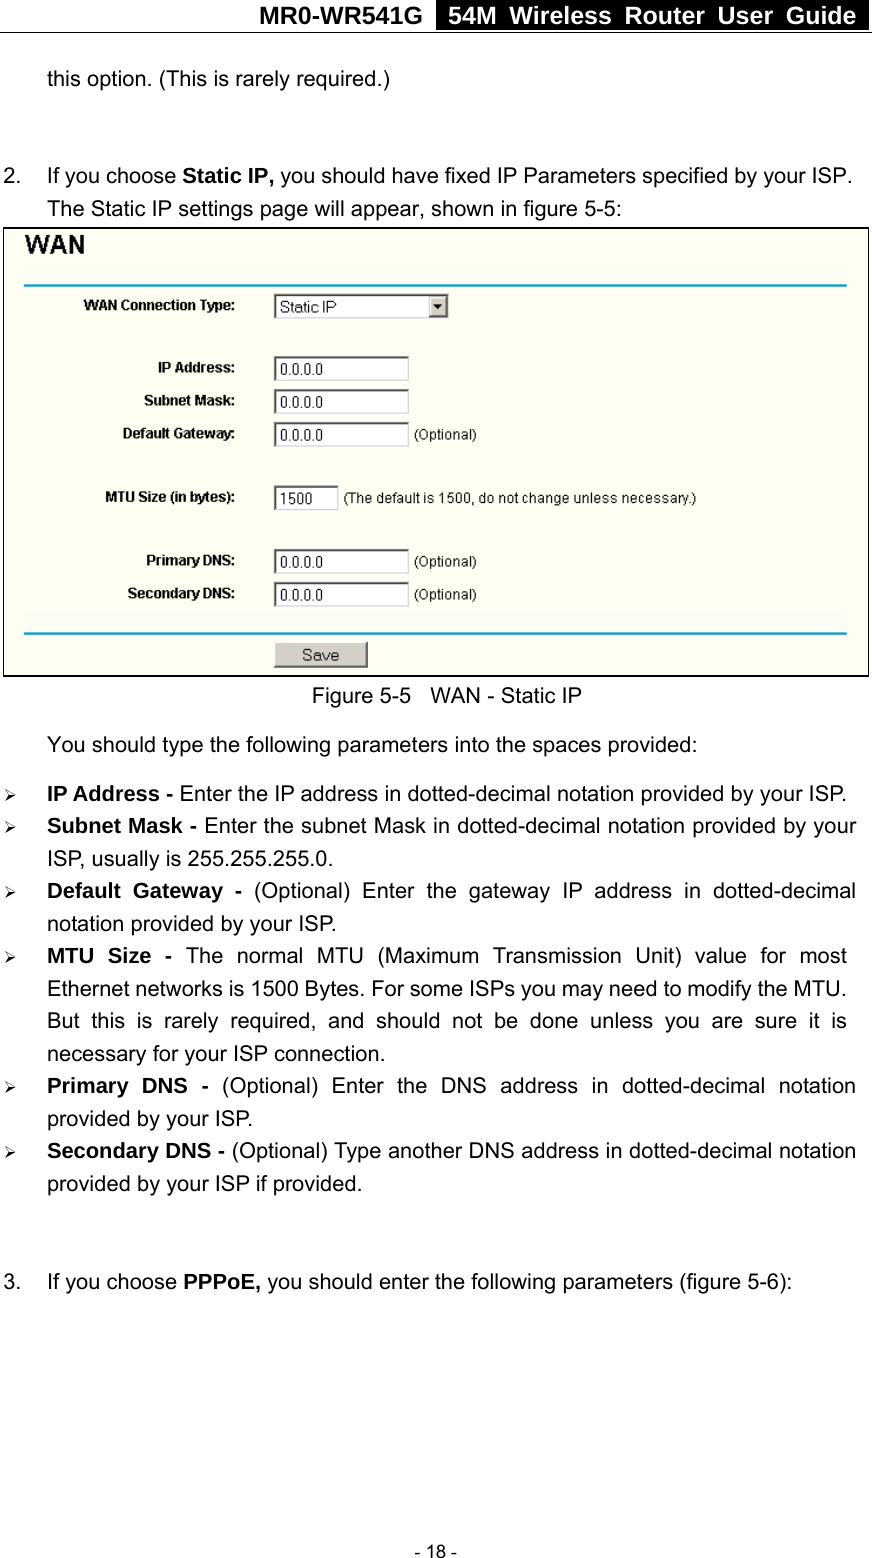 MR0-WR541G   54M Wireless Router User Guide  this option. (This is rarely required.)  2.  If you choose Static IP, you should have fixed IP Parameters specified by your ISP. The Static IP settings page will appear, shown in figure 5-5:  Figure 5-5  WAN - Static IP You should type the following parameters into the spaces provided: ¾ IP Address - Enter the IP address in dotted-decimal notation provided by your ISP. ¾ Subnet Mask - Enter the subnet Mask in dotted-decimal notation provided by your ISP, usually is 255.255.255.0. ¾ Default Gateway - (Optional) Enter the gateway IP address in dotted-decimal notation provided by your ISP. ¾ MTU Size - The normal MTU (Maximum Transmission Unit) value for most Ethernet networks is 1500 Bytes. For some ISPs you may need to modify the MTU. But this is rarely required, and should not be done unless you are sure it is necessary for your ISP connection. ¾ Primary DNS - (Optional) Enter the DNS address in dotted-decimal notation provided by your ISP. ¾ Secondary DNS - (Optional) Type another DNS address in dotted-decimal notation provided by your ISP if provided.  3.  If you choose PPPoE, you should enter the following parameters (figure 5-6):    - 18 - 